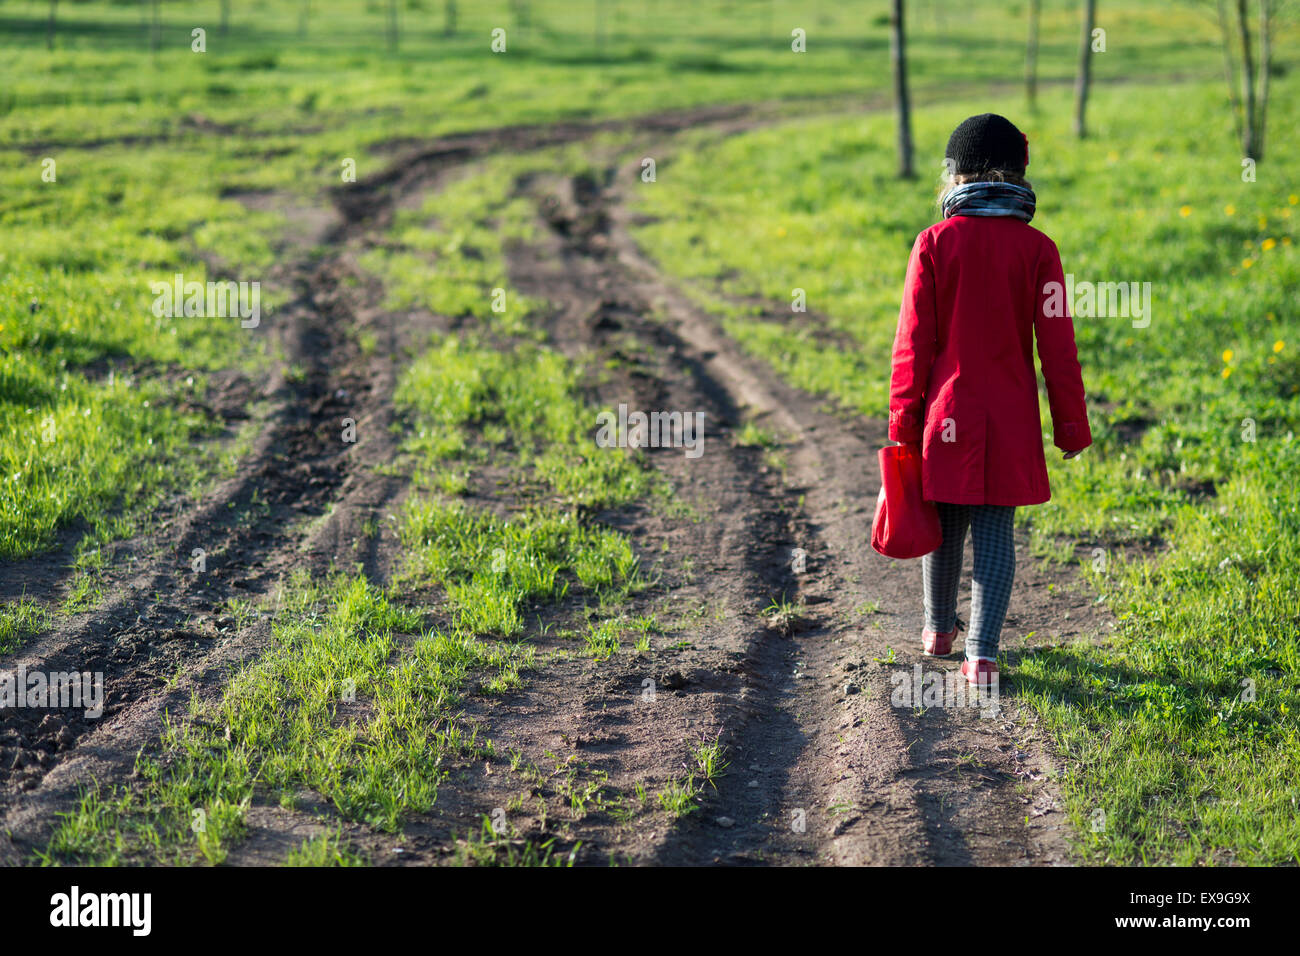 girl in red coat going far away by dirty country road, selective focus on girl Stock Photo